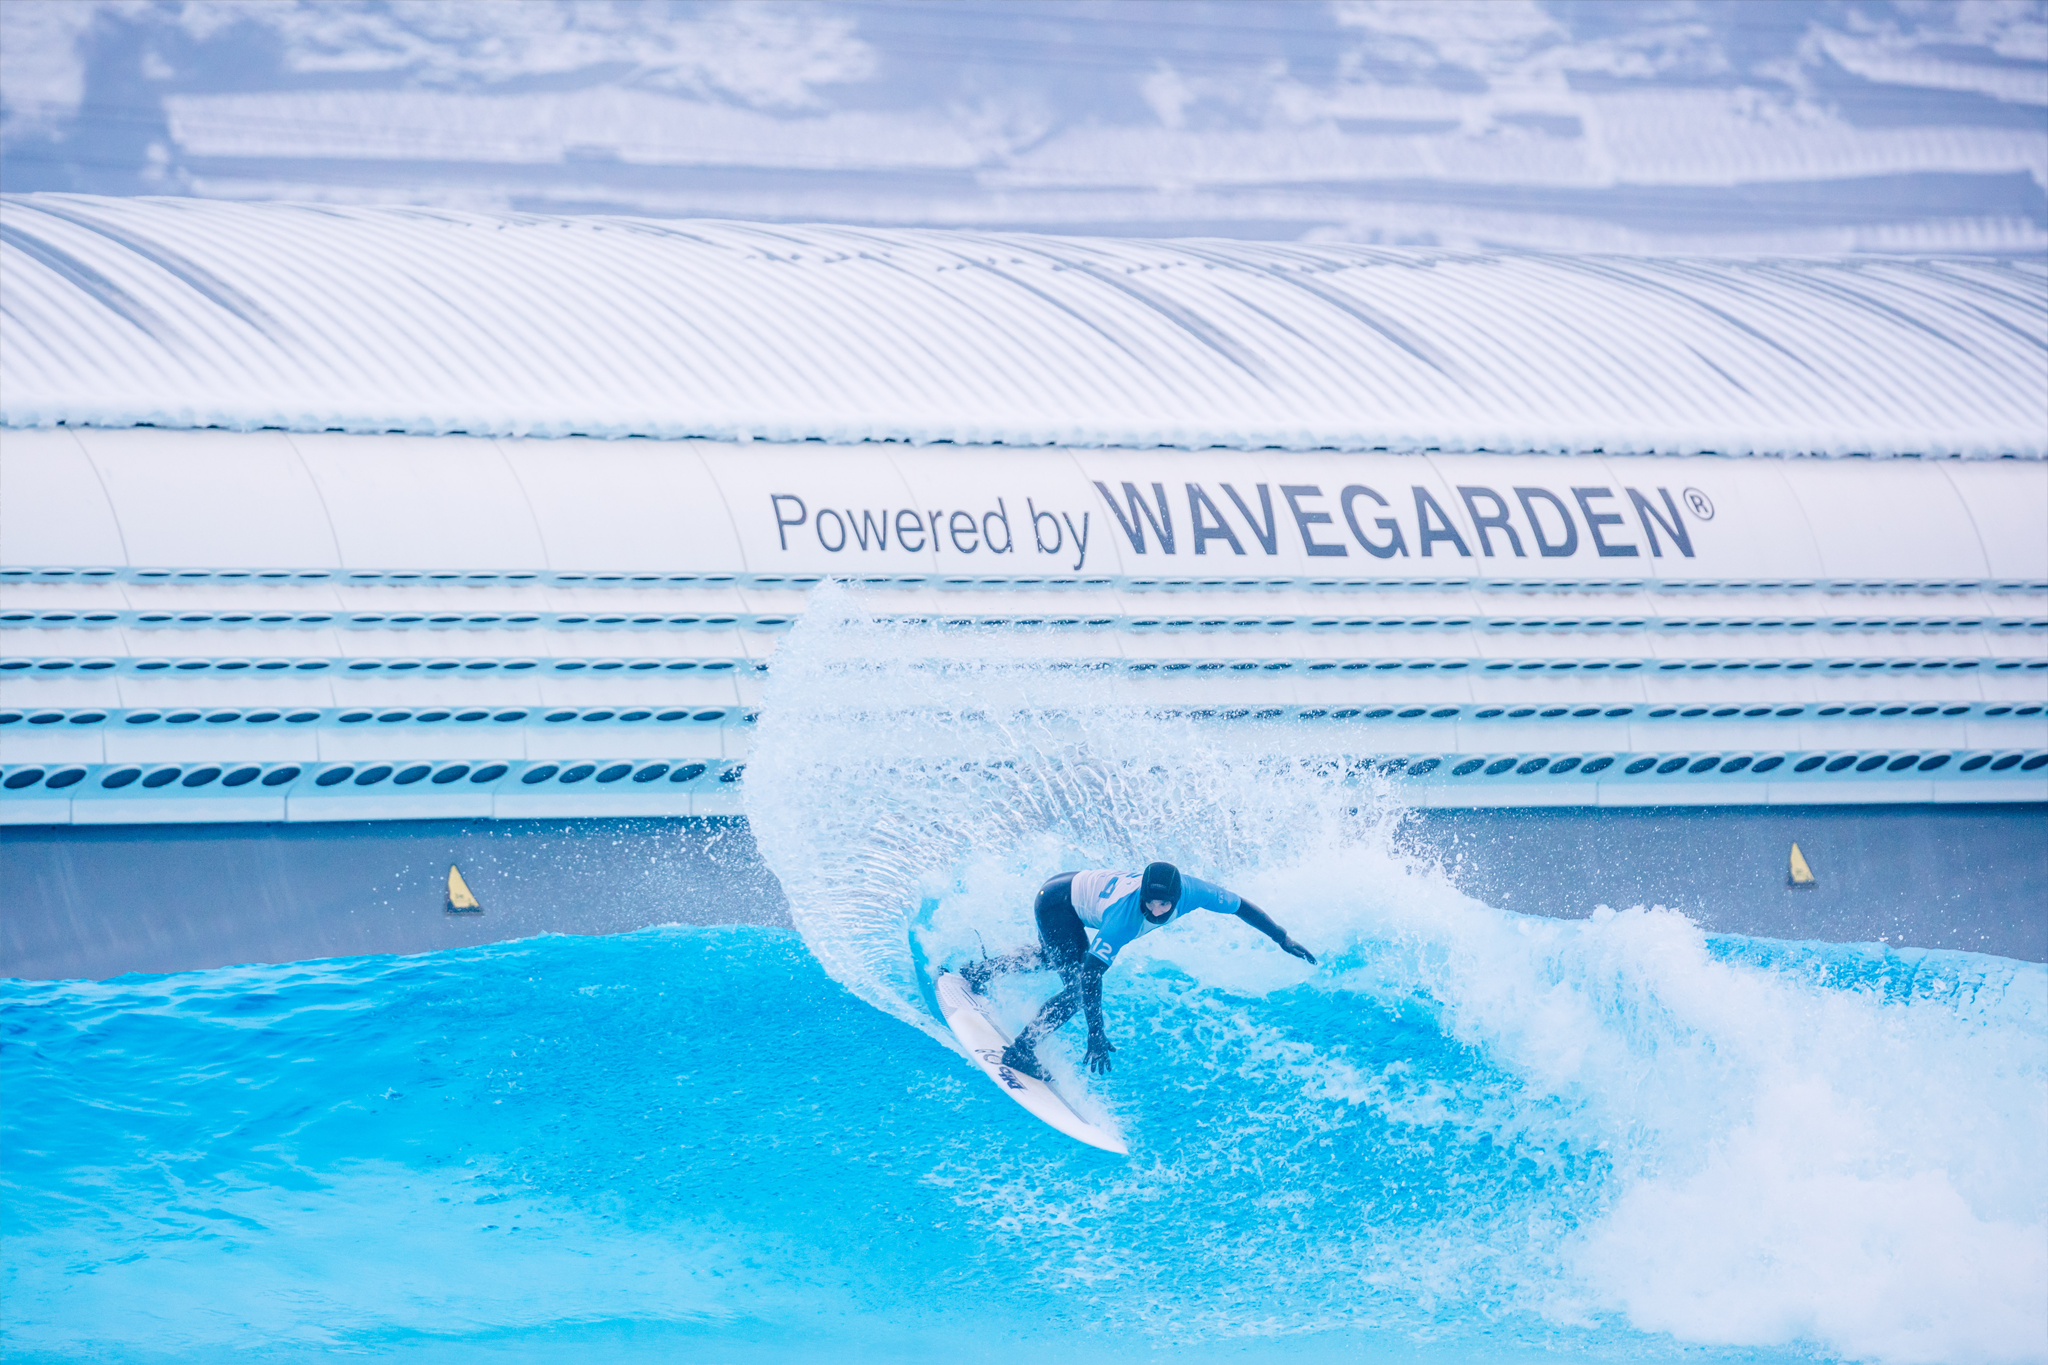 Alaia Winter Cup - Edelweiss Surf Tour by Swiss Surfing